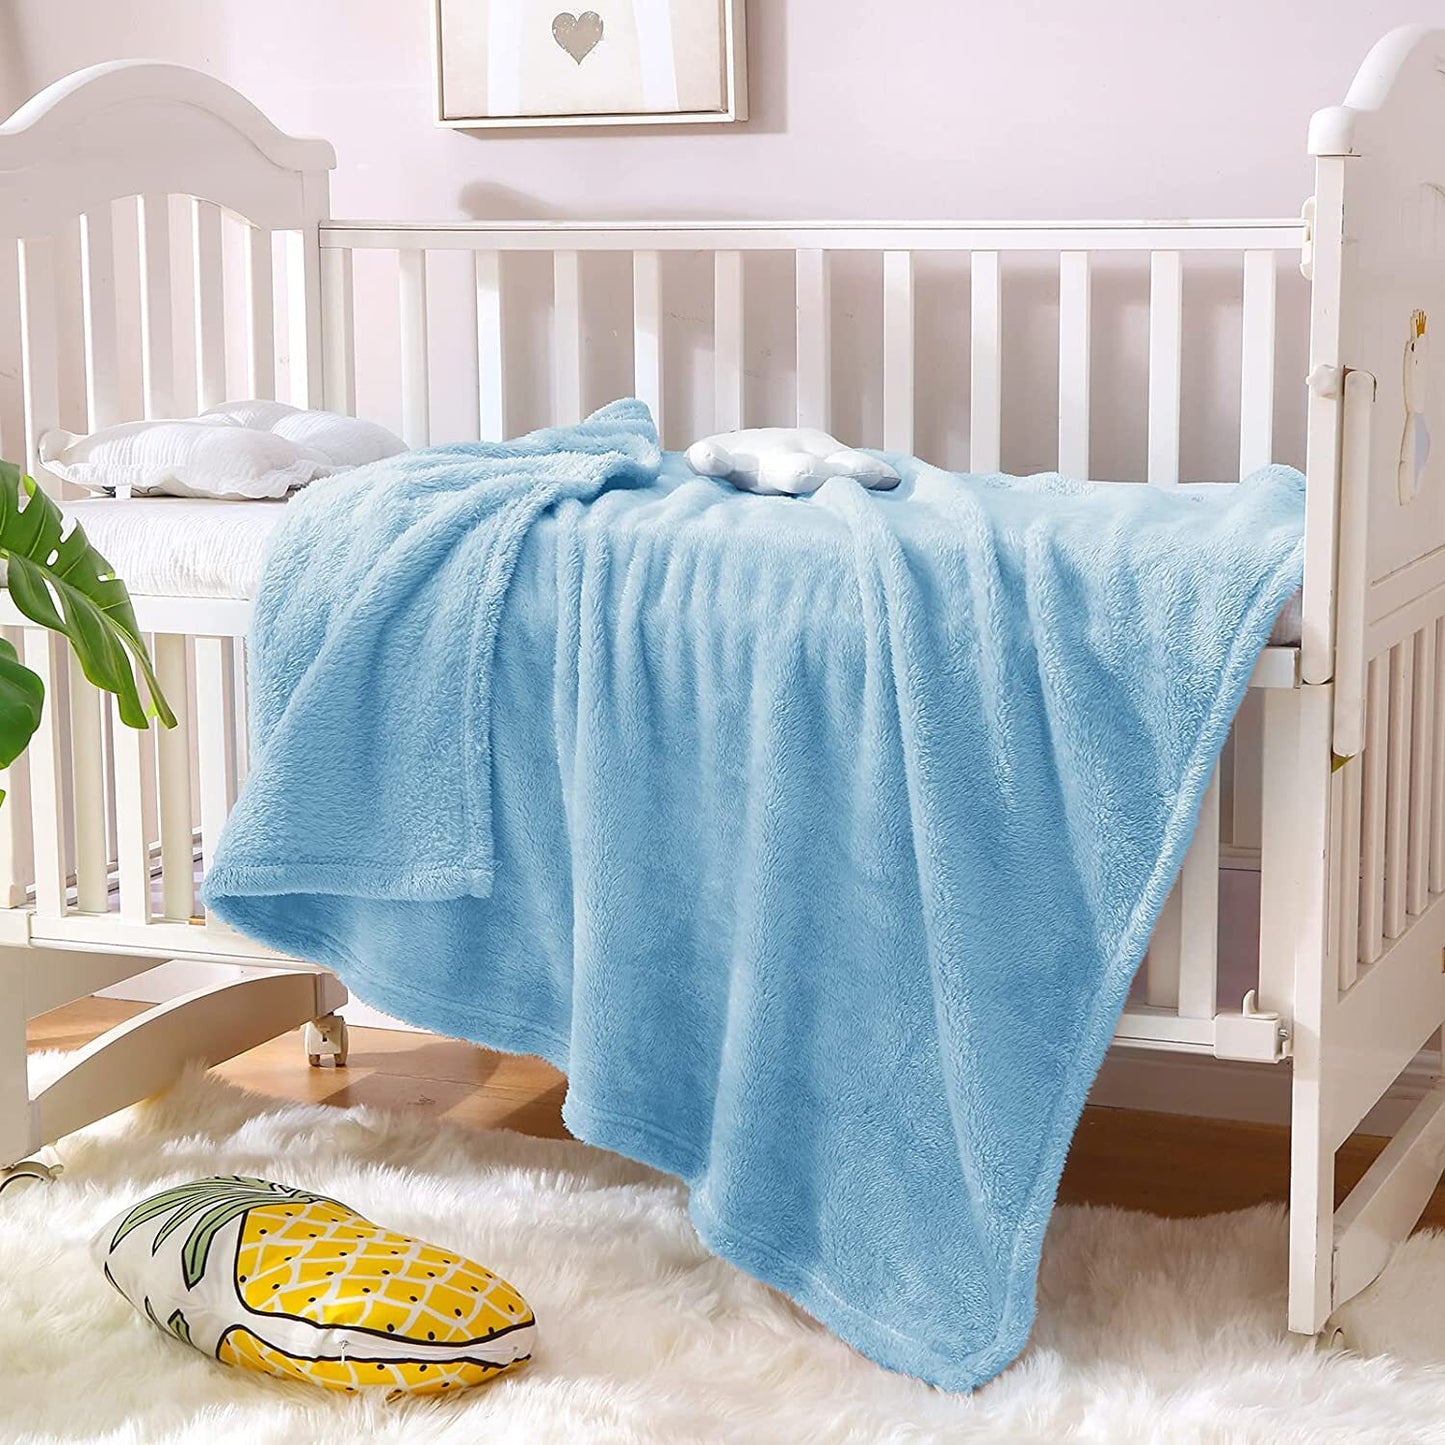 Exclusivo Mezcla Plush Baby Blanket, Soft and Warm Swaddle Throw Blanket, Infant, Newborn, Toddler and Kids Receiving Fleece Blankets for Crib Stroller (40x50 inches, Baby Blue)